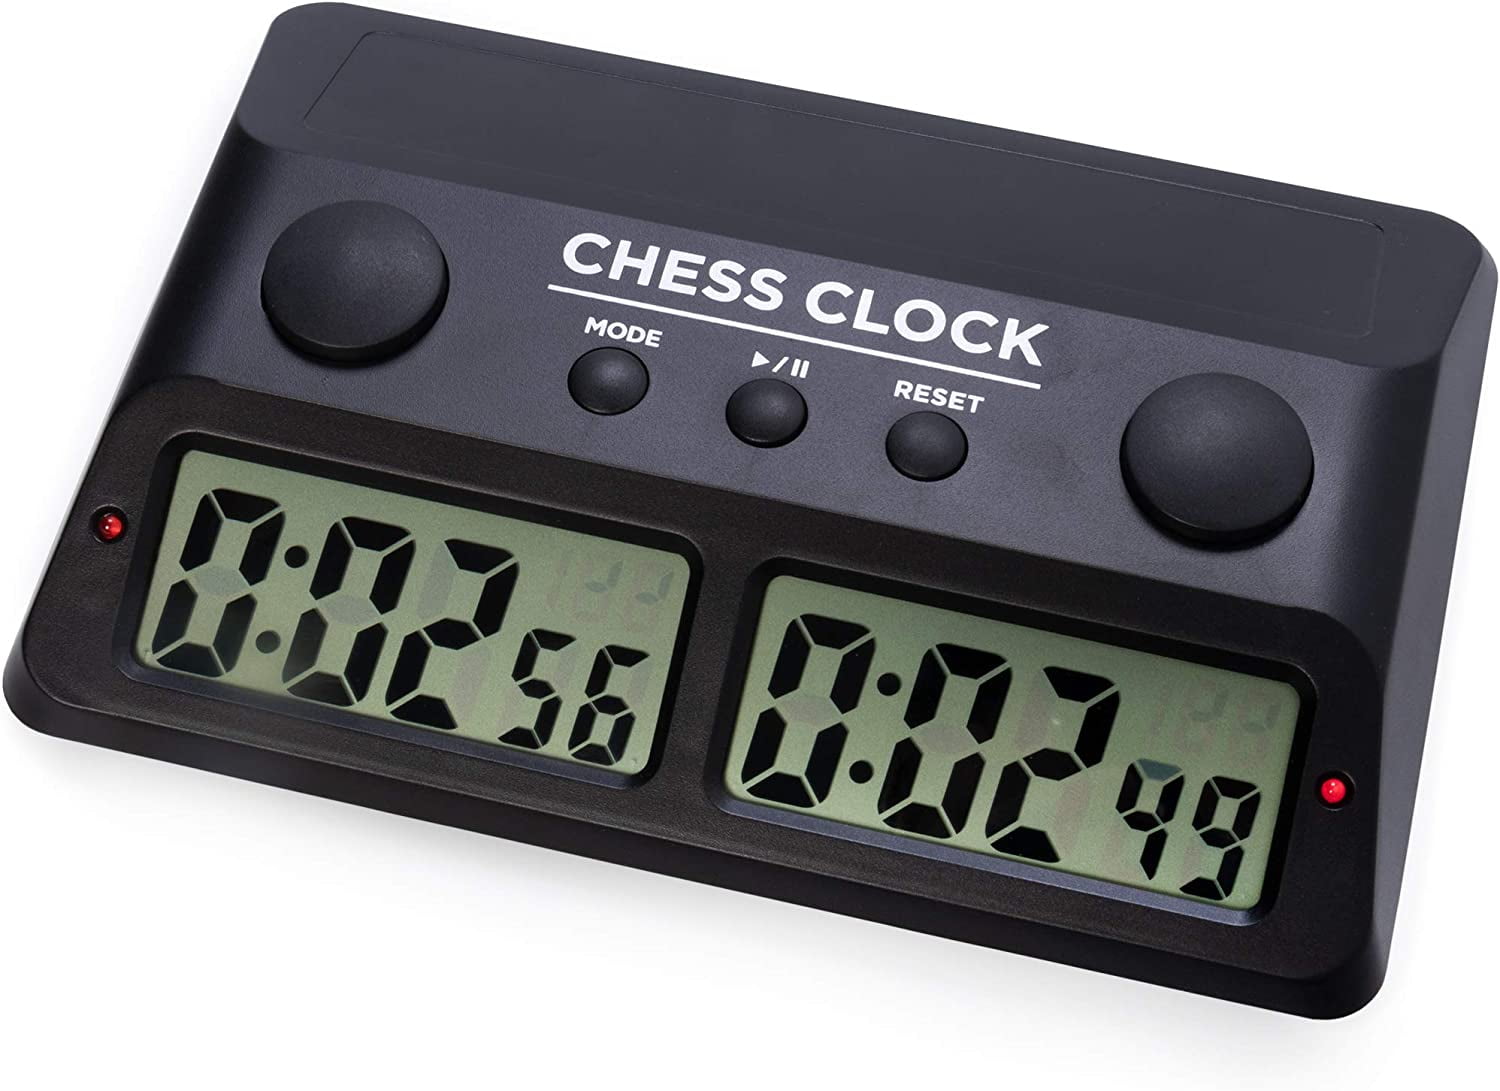 Picture of Brybelly GGAM-104 Digital Chess Clock